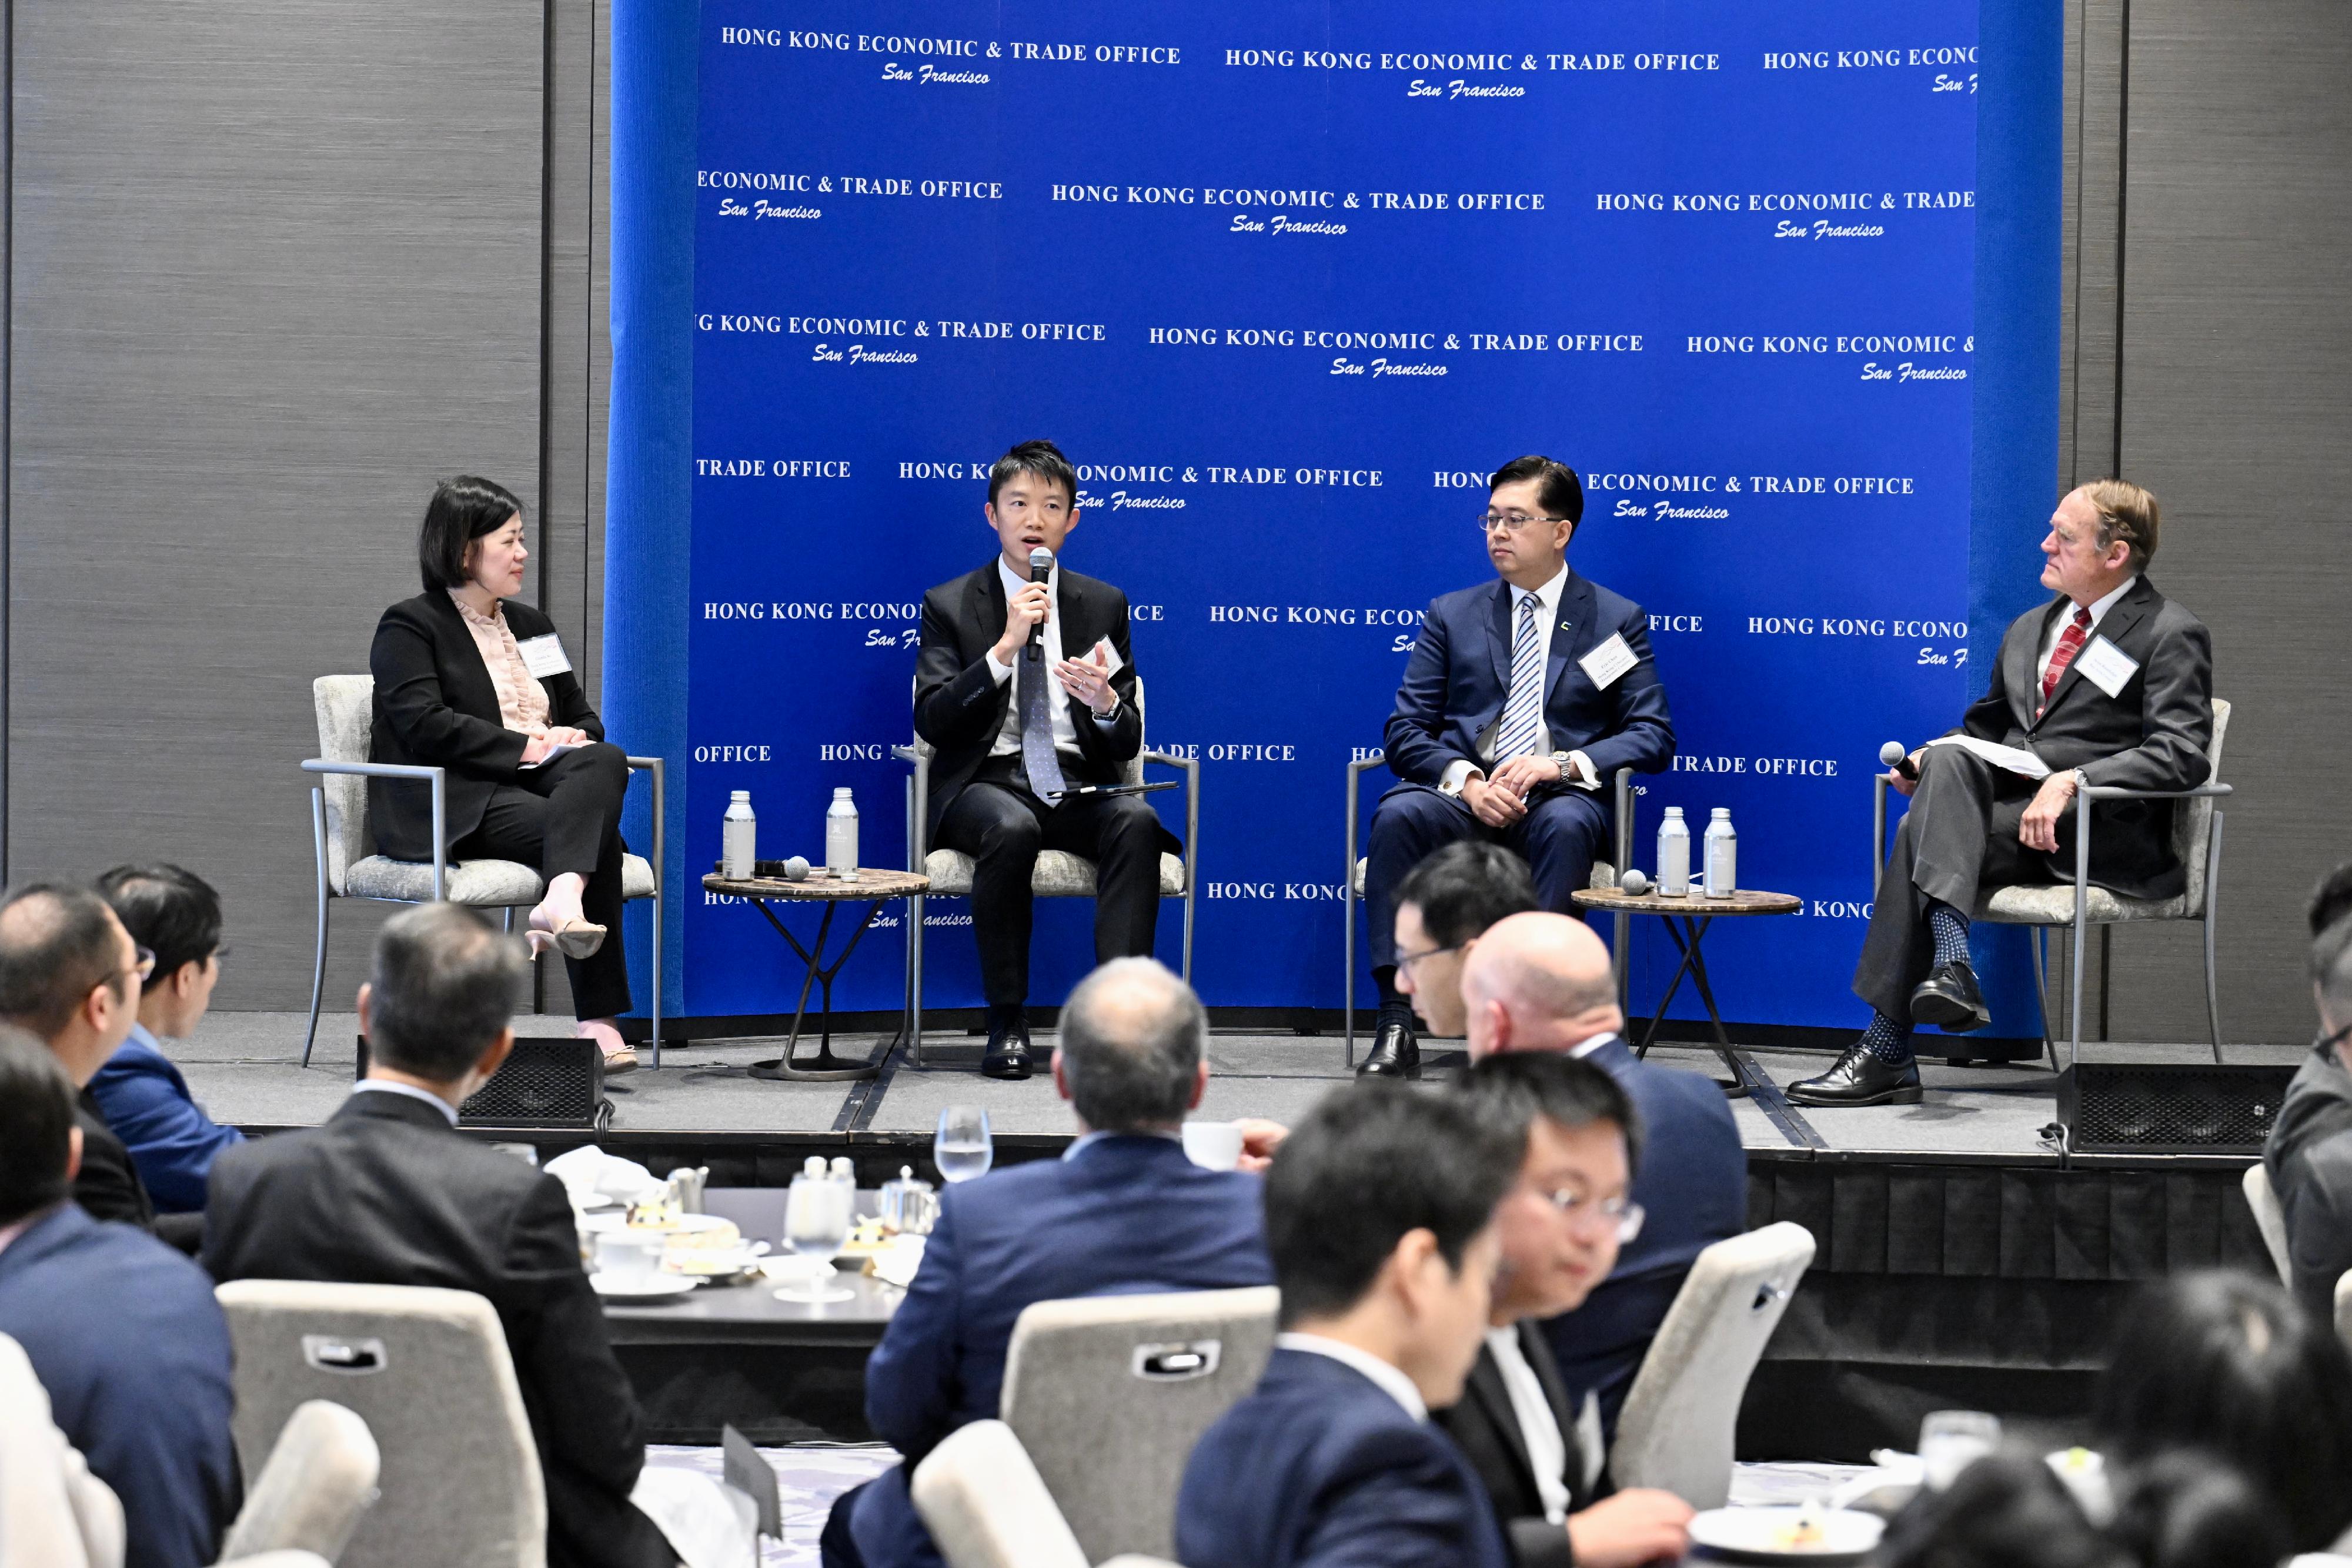 The Financial Secretary, Mr Paul Chan, began his visit to the United States on May 28 (San Francisco time), and attended a business luncheon jointly organised by the Hong Kong Economic and Trade Office in San Francisco and the Bay Area Council, a business organisation in San Francisco. Photo shows Executive Director of the Hong Kong Monetary Authority Mr Kenneth Hui (second left); Co-Head of Markets at the Hong Kong Exchanges and Clearing Limited Ms Glenda So (first left), and the Chief Public Mission Officer of the Hong Kong Cyberport Management Company Limited, Mr Eric Chan (second right), at a panel discussion at the luncheon.
